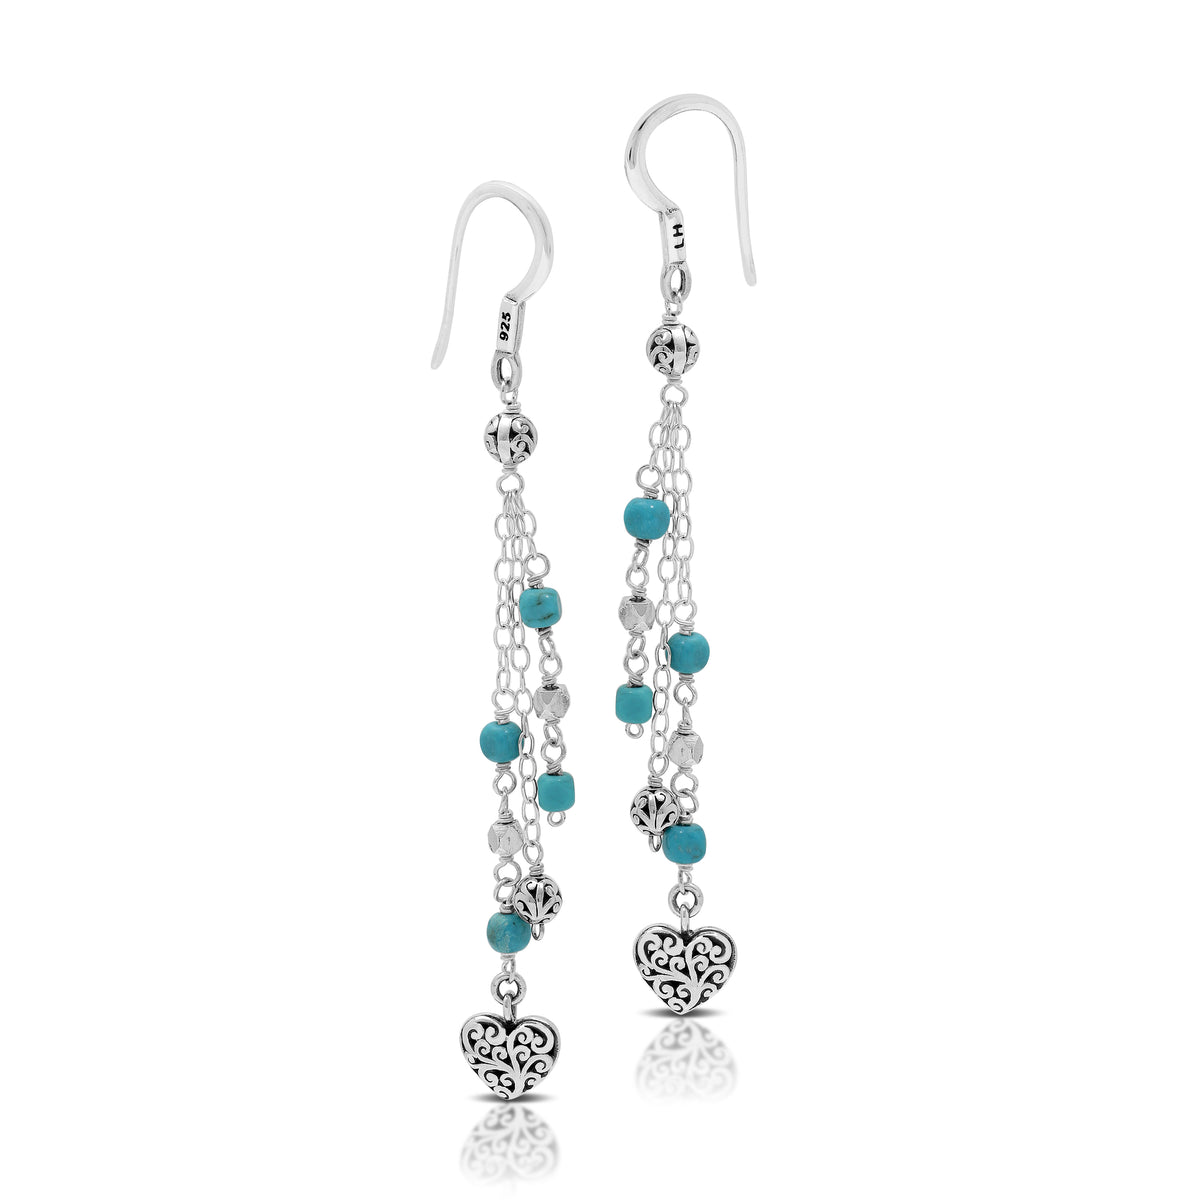 Layered Turquoise & LH Scroll Beads with Heart Charms Chandelier Earrings (60mm)